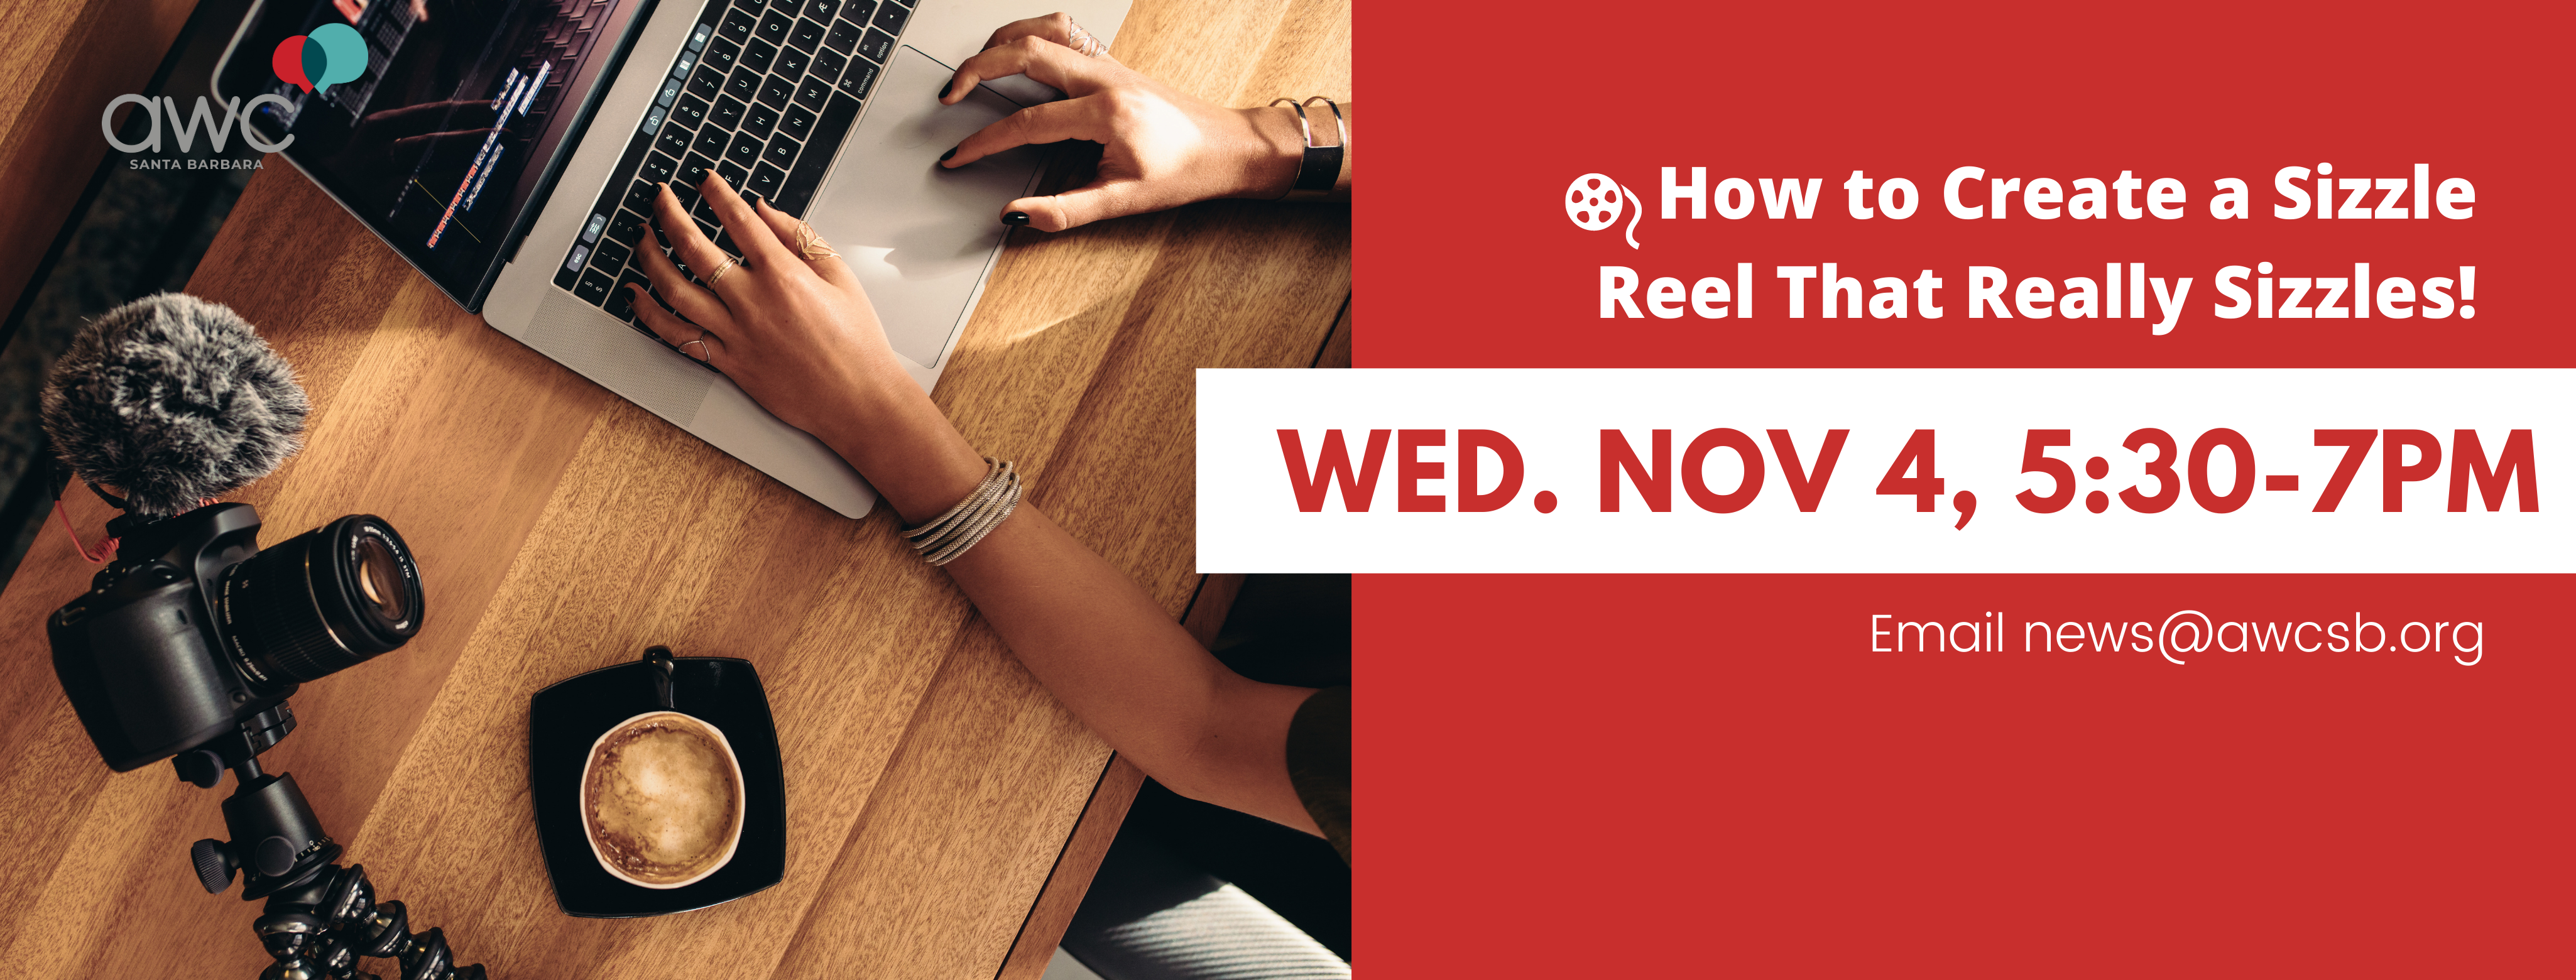 Wednesday Nov 4 How to Create a Sizzle Reel That Really Sizzles! AWC